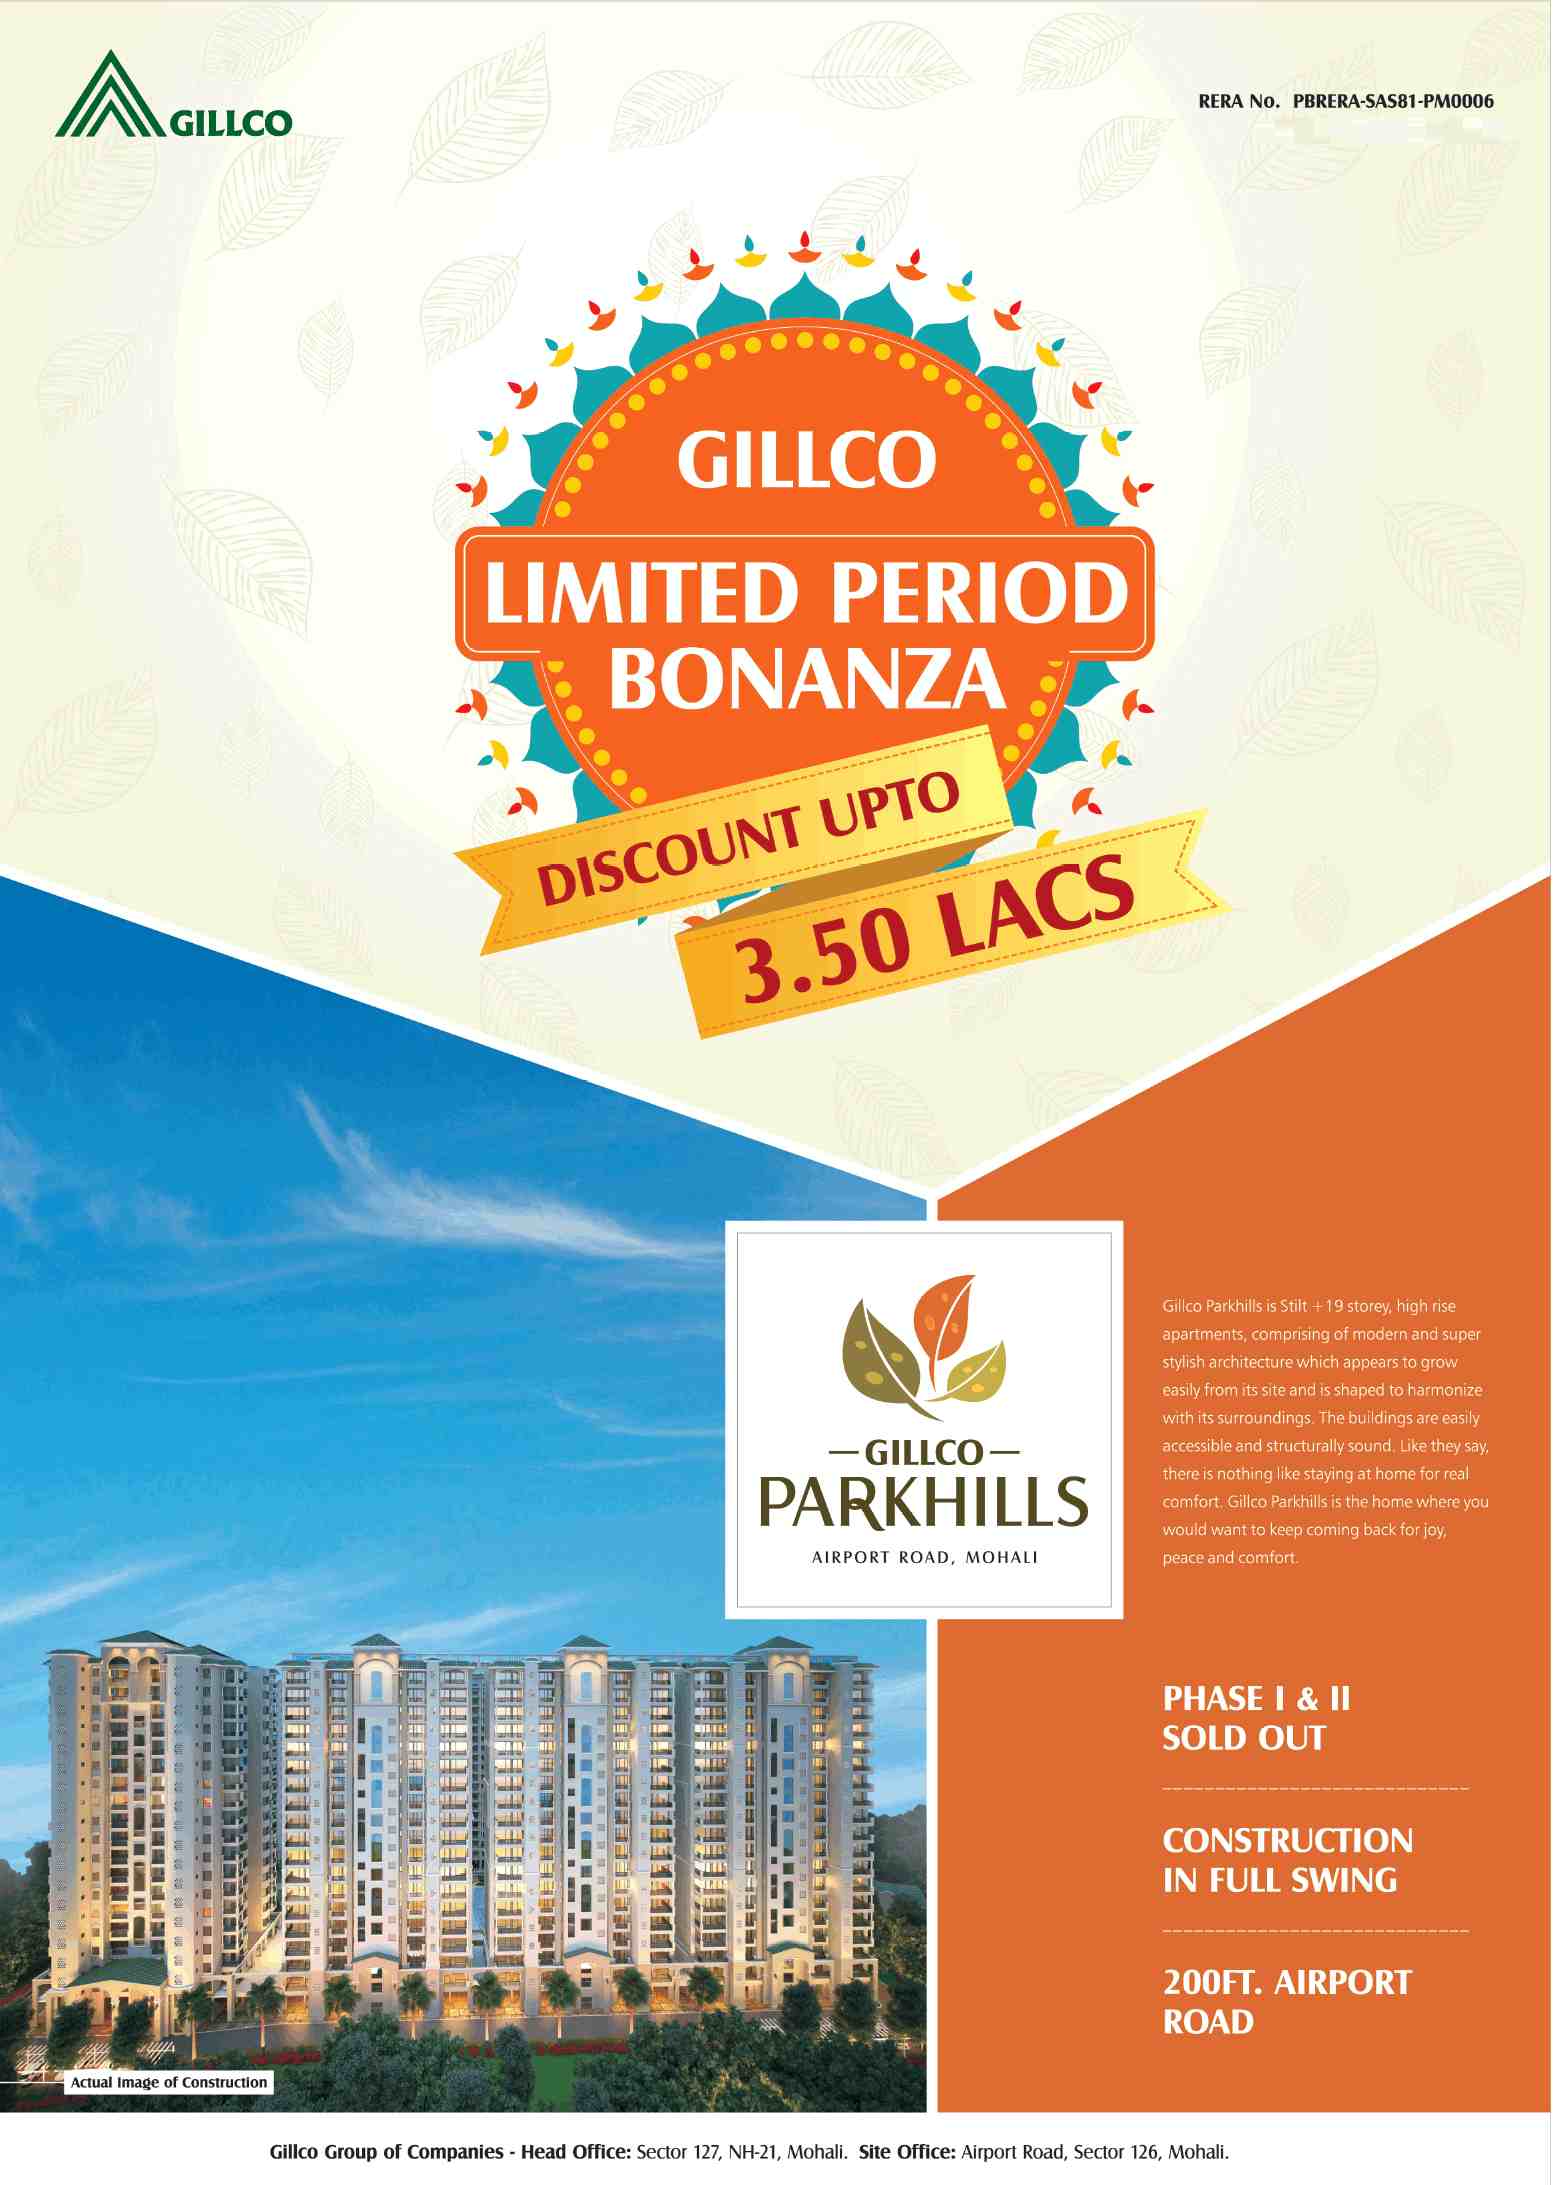 Gillco presents limited period bonanza with discount up to Rs. 3.50 Lacs at Parkhills in Mohali Update